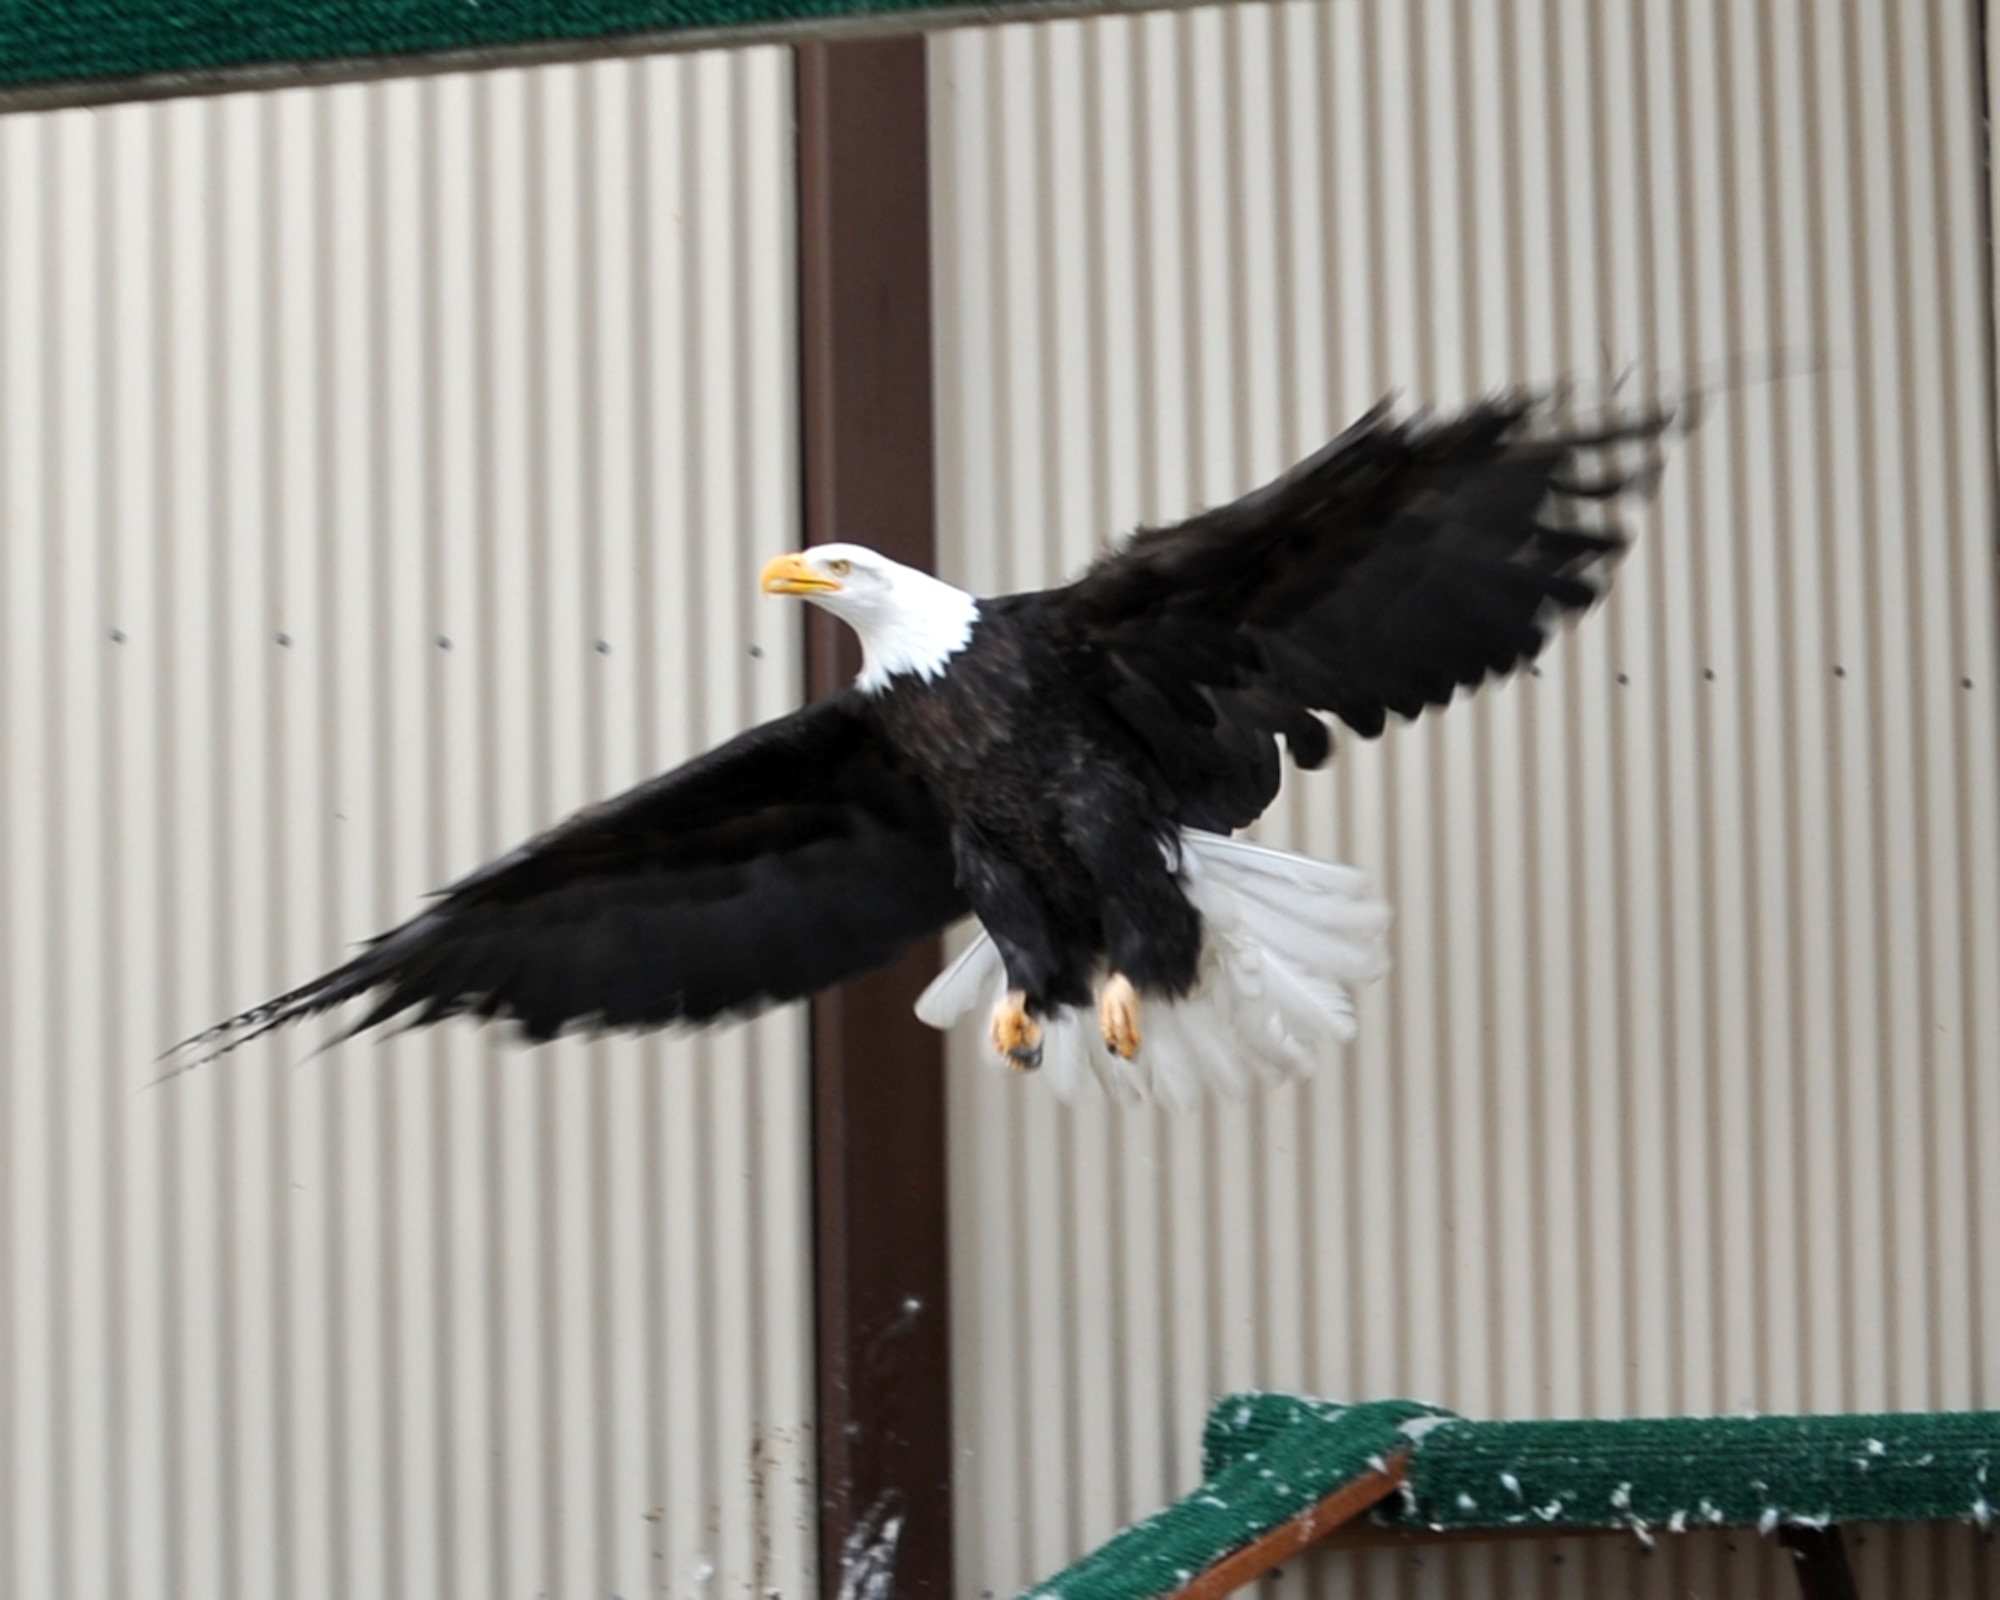 130511-F-IY975-008: JOINT BASE ELMENDORF-RICHARDSON, Alaska -- Notch Wing, one of the two Bald Eagles that reside in the Joint Base Elmendorf-Richardson eagle cage, flies from perch to perch inside the cage May 11. A group of volunteers maintains the cage and cares for the eagles, which have been injured and are not able to survive in the wild. (U.S. Air Force photo/Senior Airman Blake Mize)